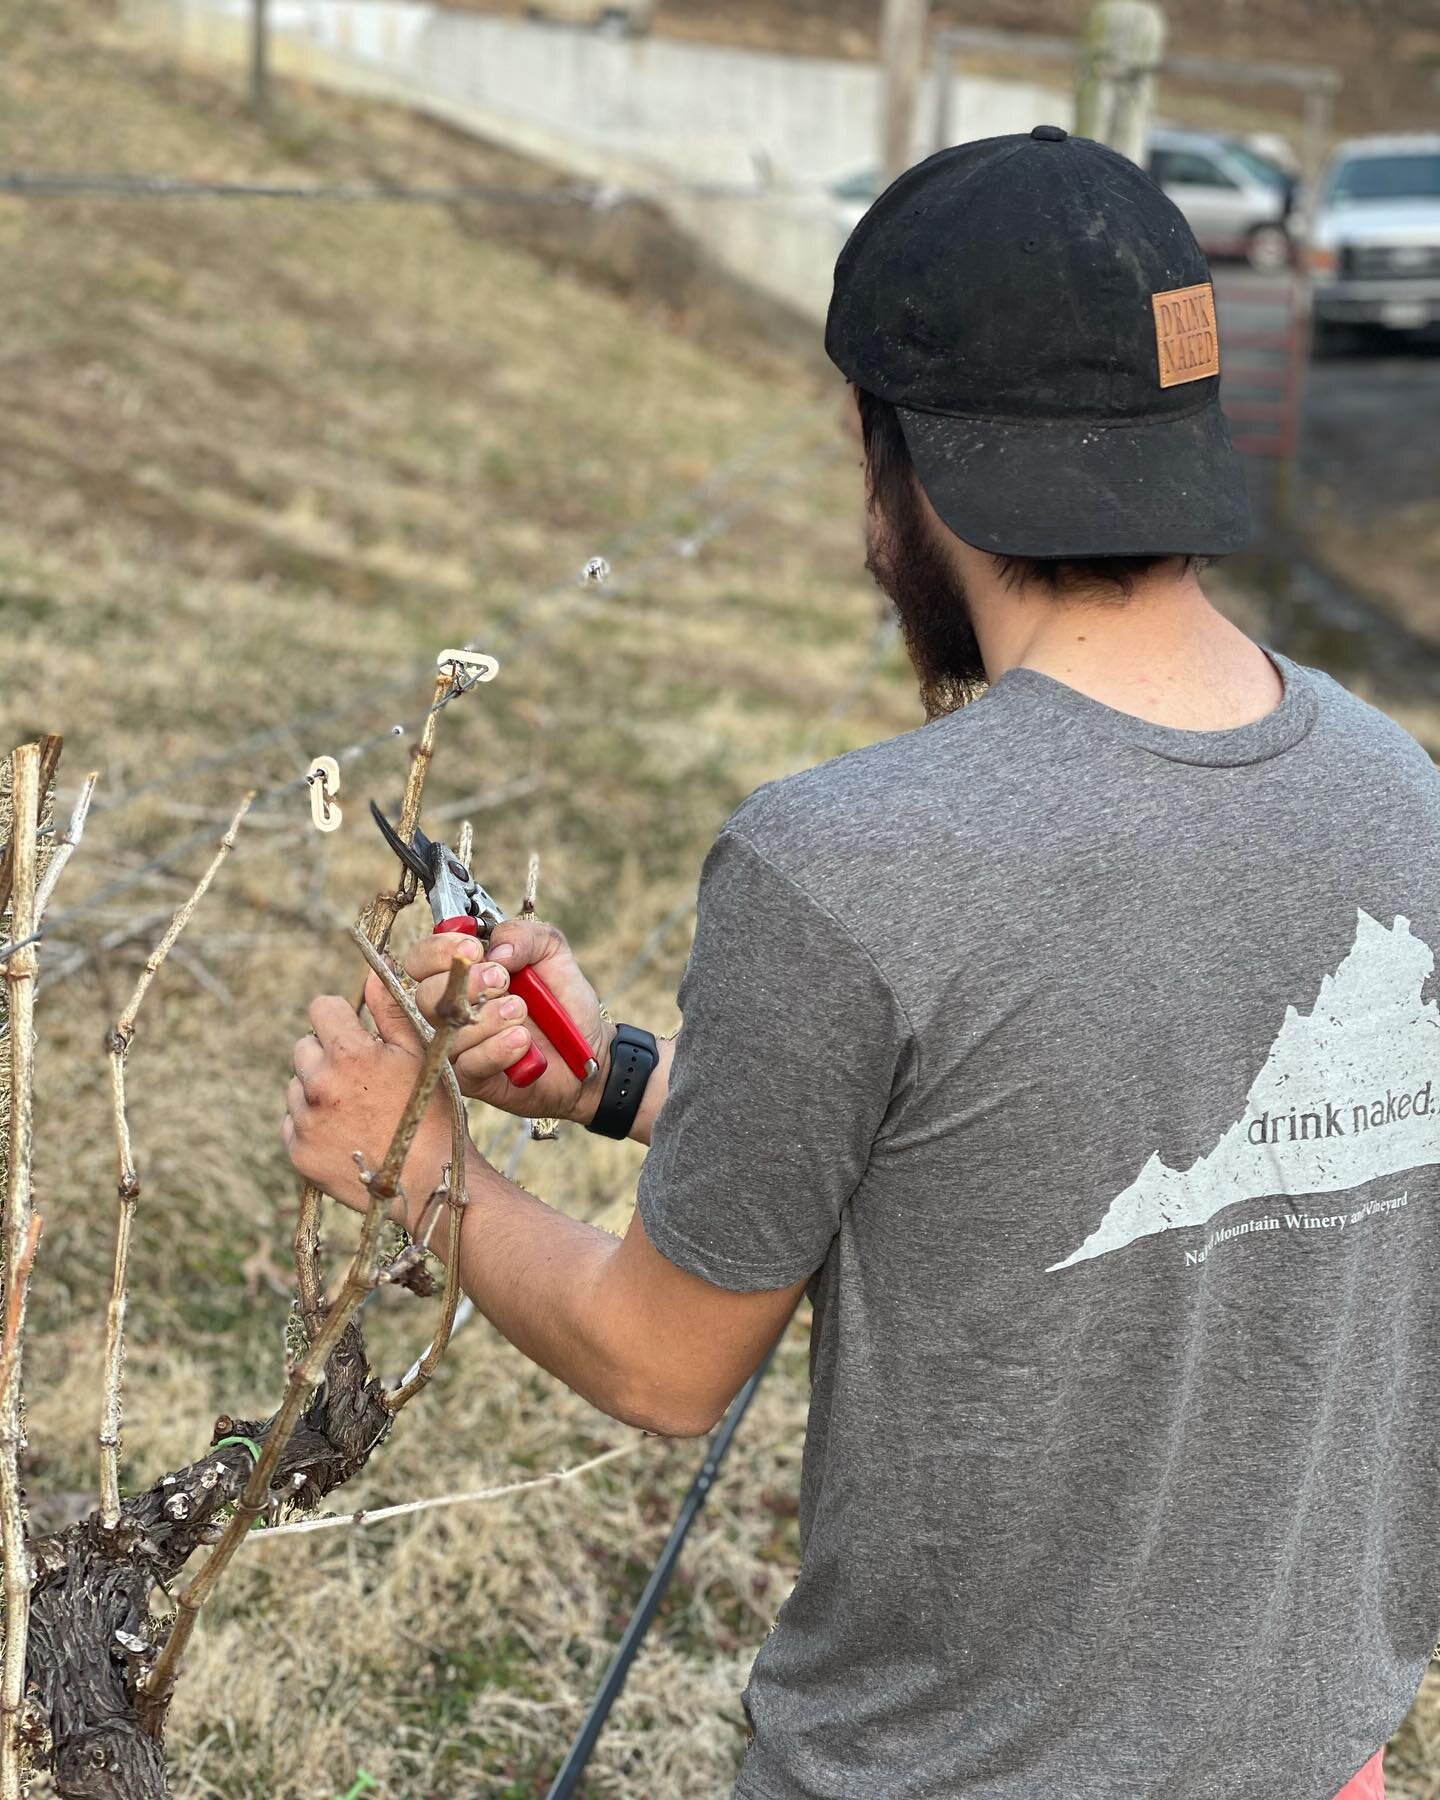 Last round of pruning before the start of the growing season! Looking forward to a great 2021 harvest! #drinknaked 

#drinklocal #shoplocal #wine #winelover #winetasting #vatourism #redwine #whitewine